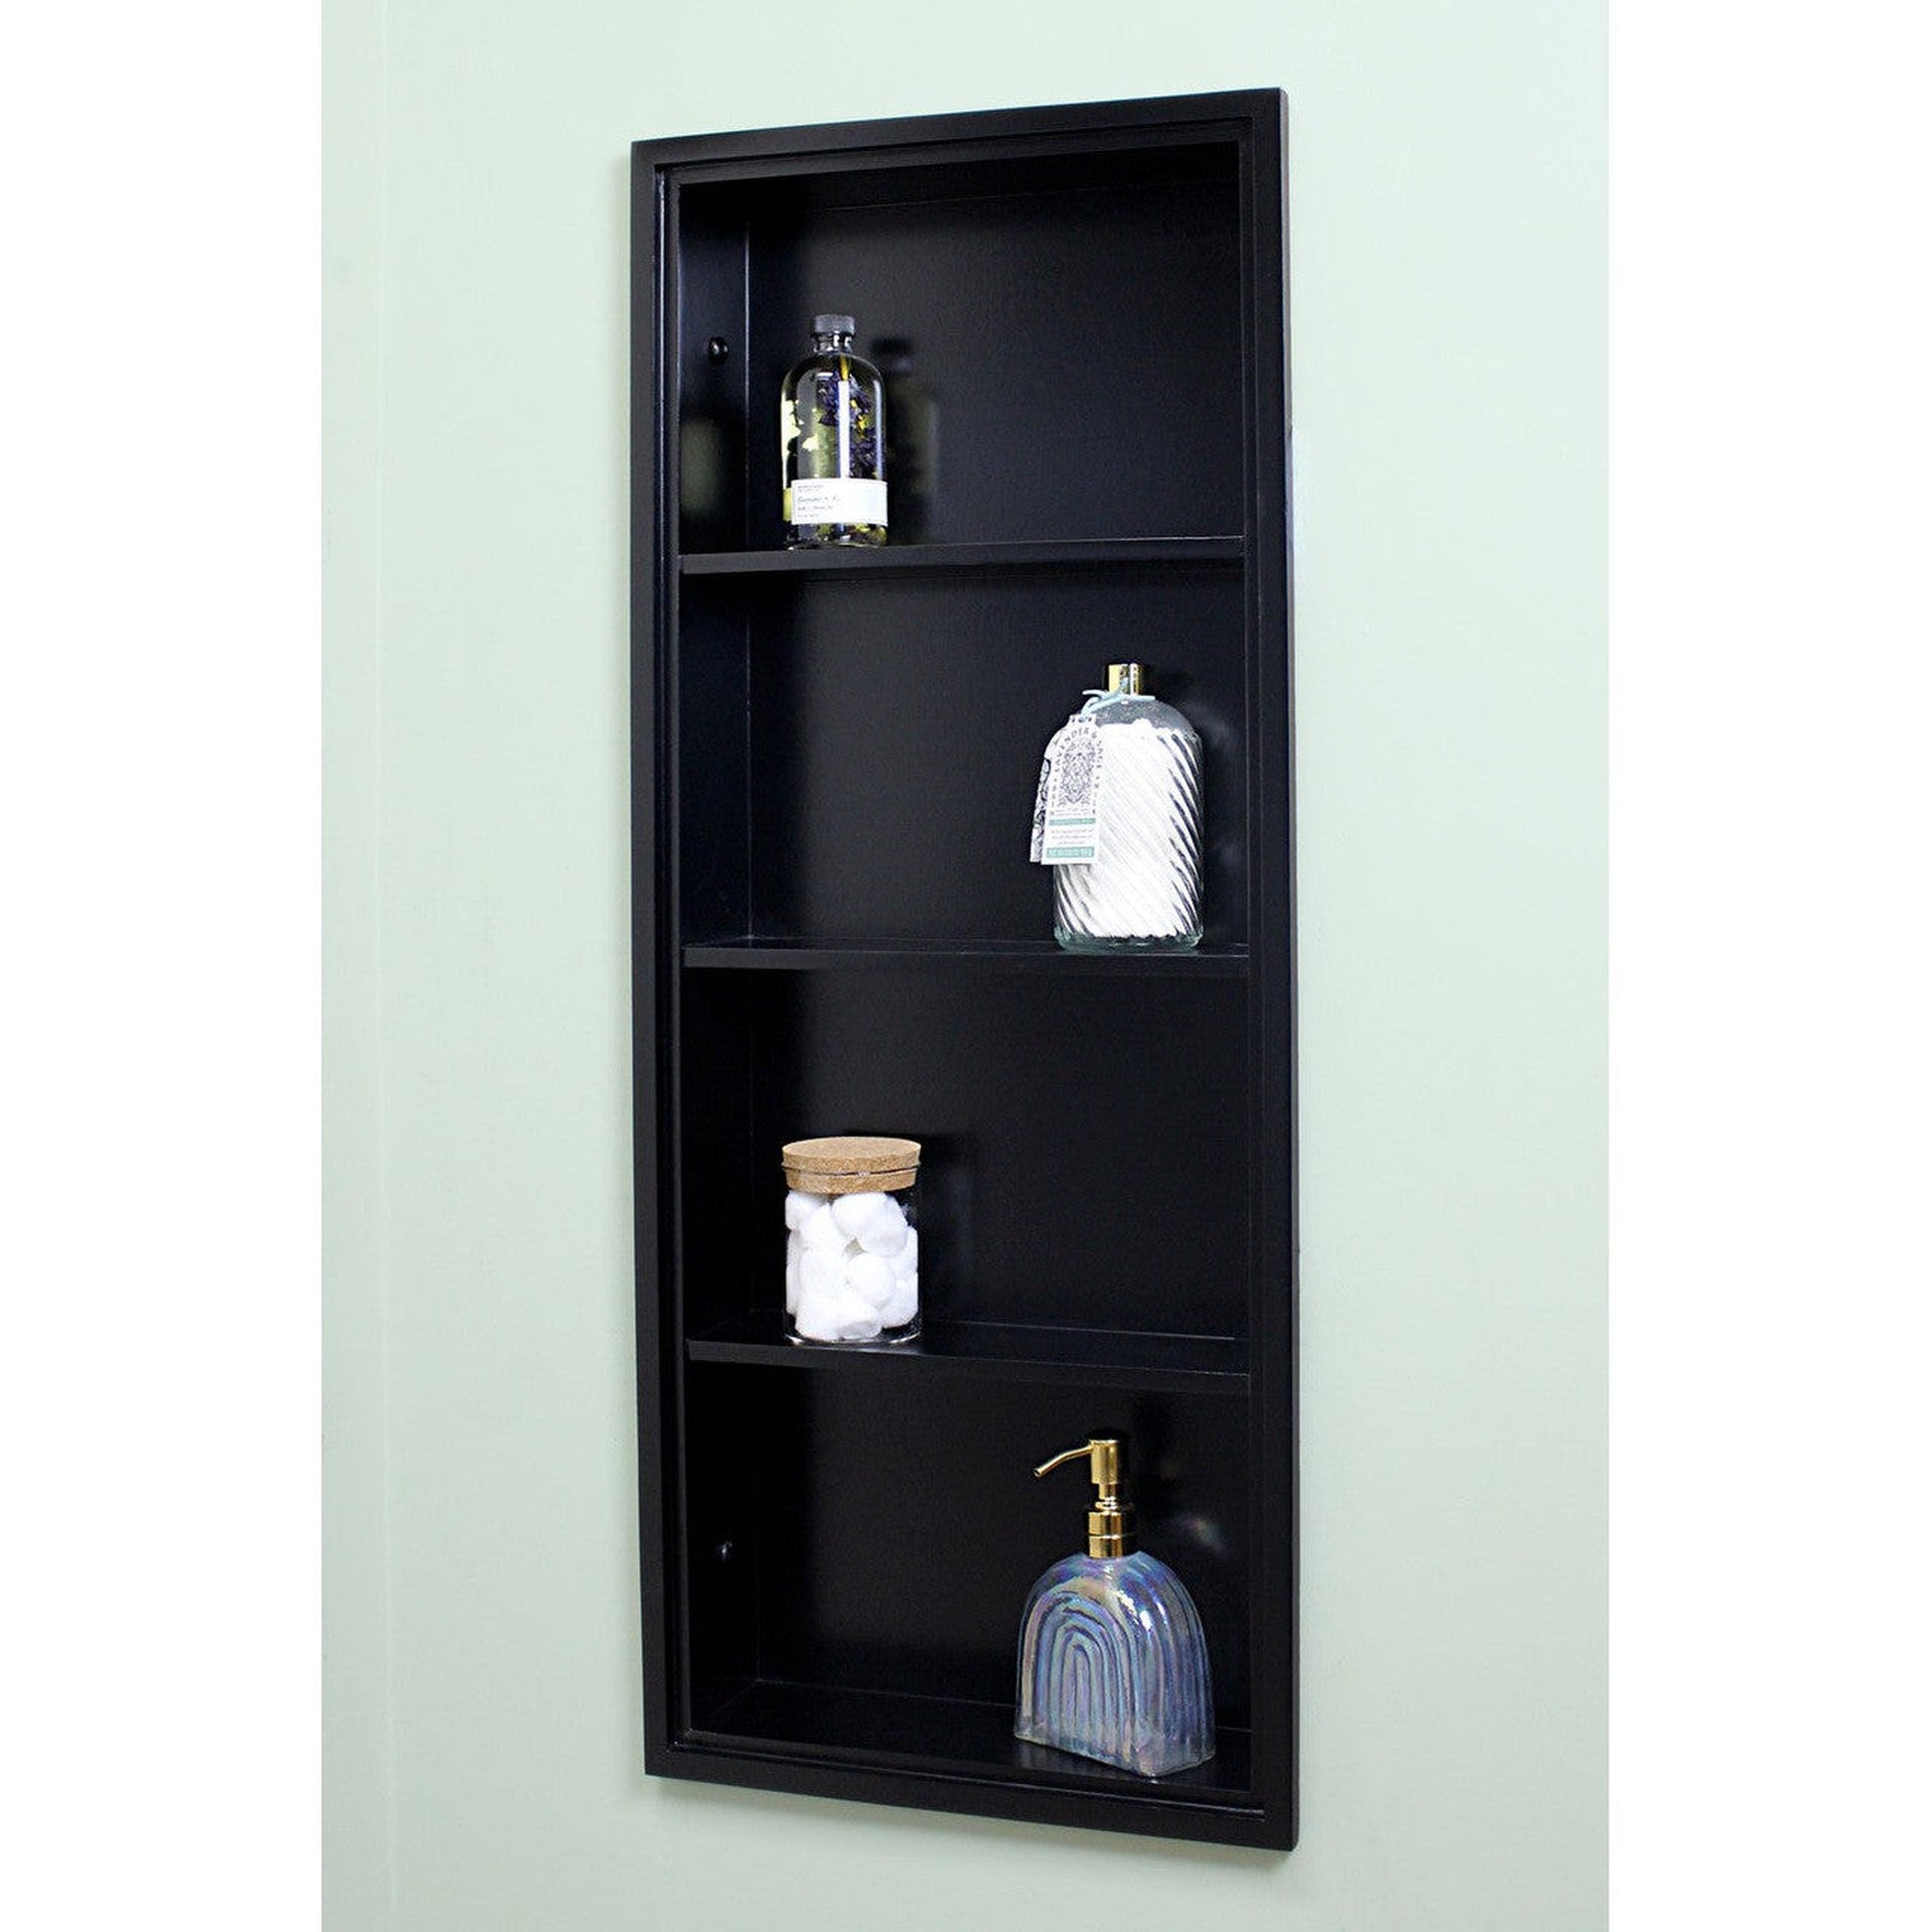 Fox Hollow Furnishings 14" x 36" Black Recessed Sloane Wall Niche With Plain Back and Three Shelves